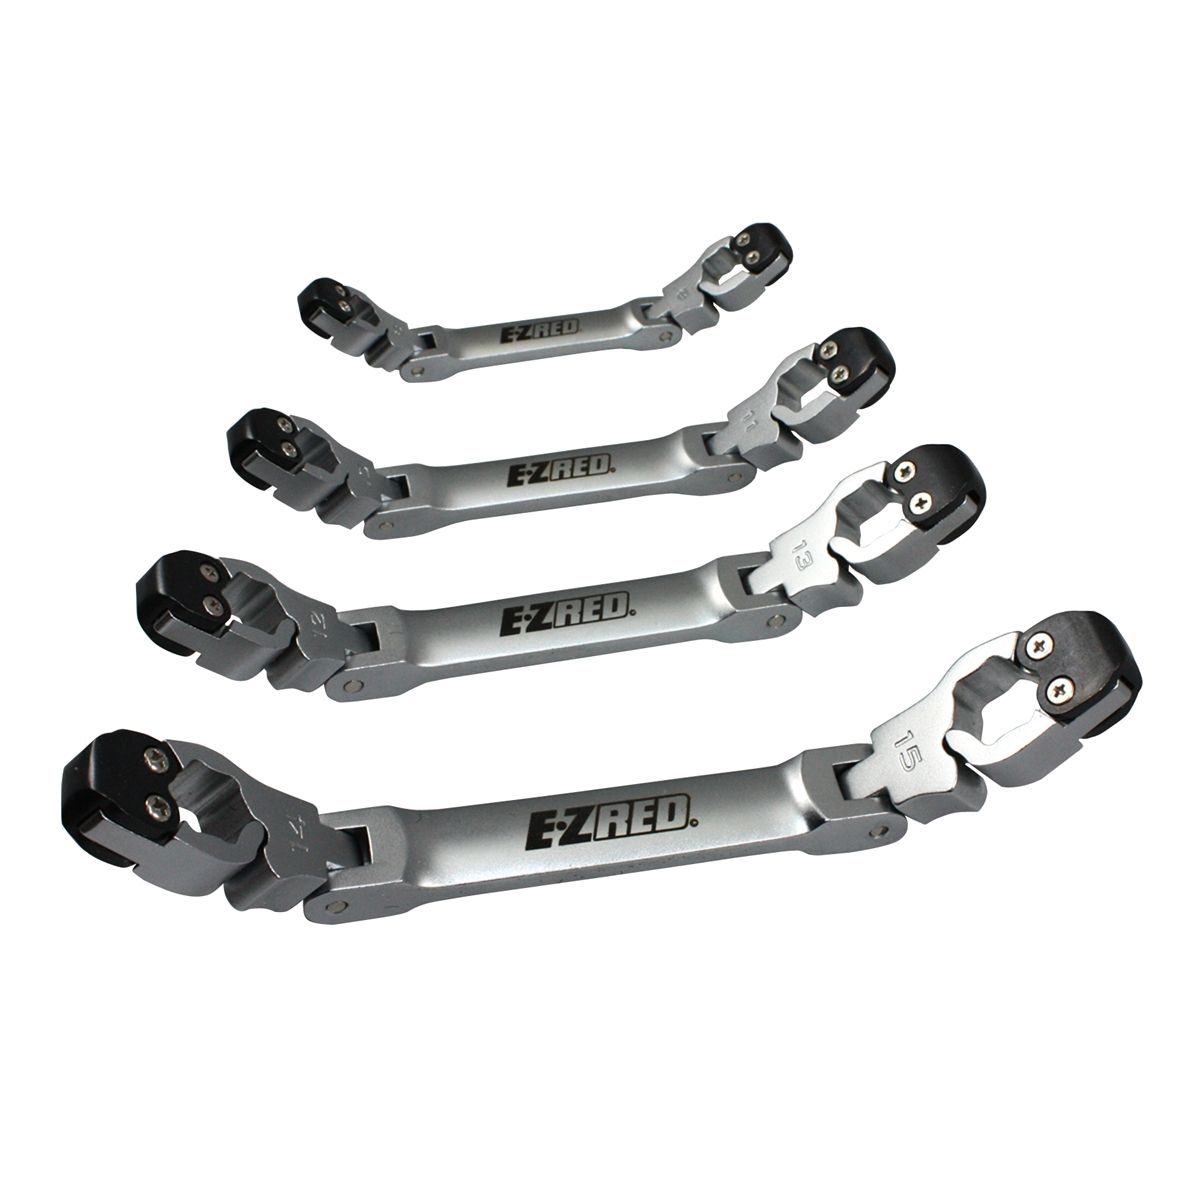 1" INCH WITH CARRY BAG 11 pc SAE COMBINATION WRENCH SET 3/8" 